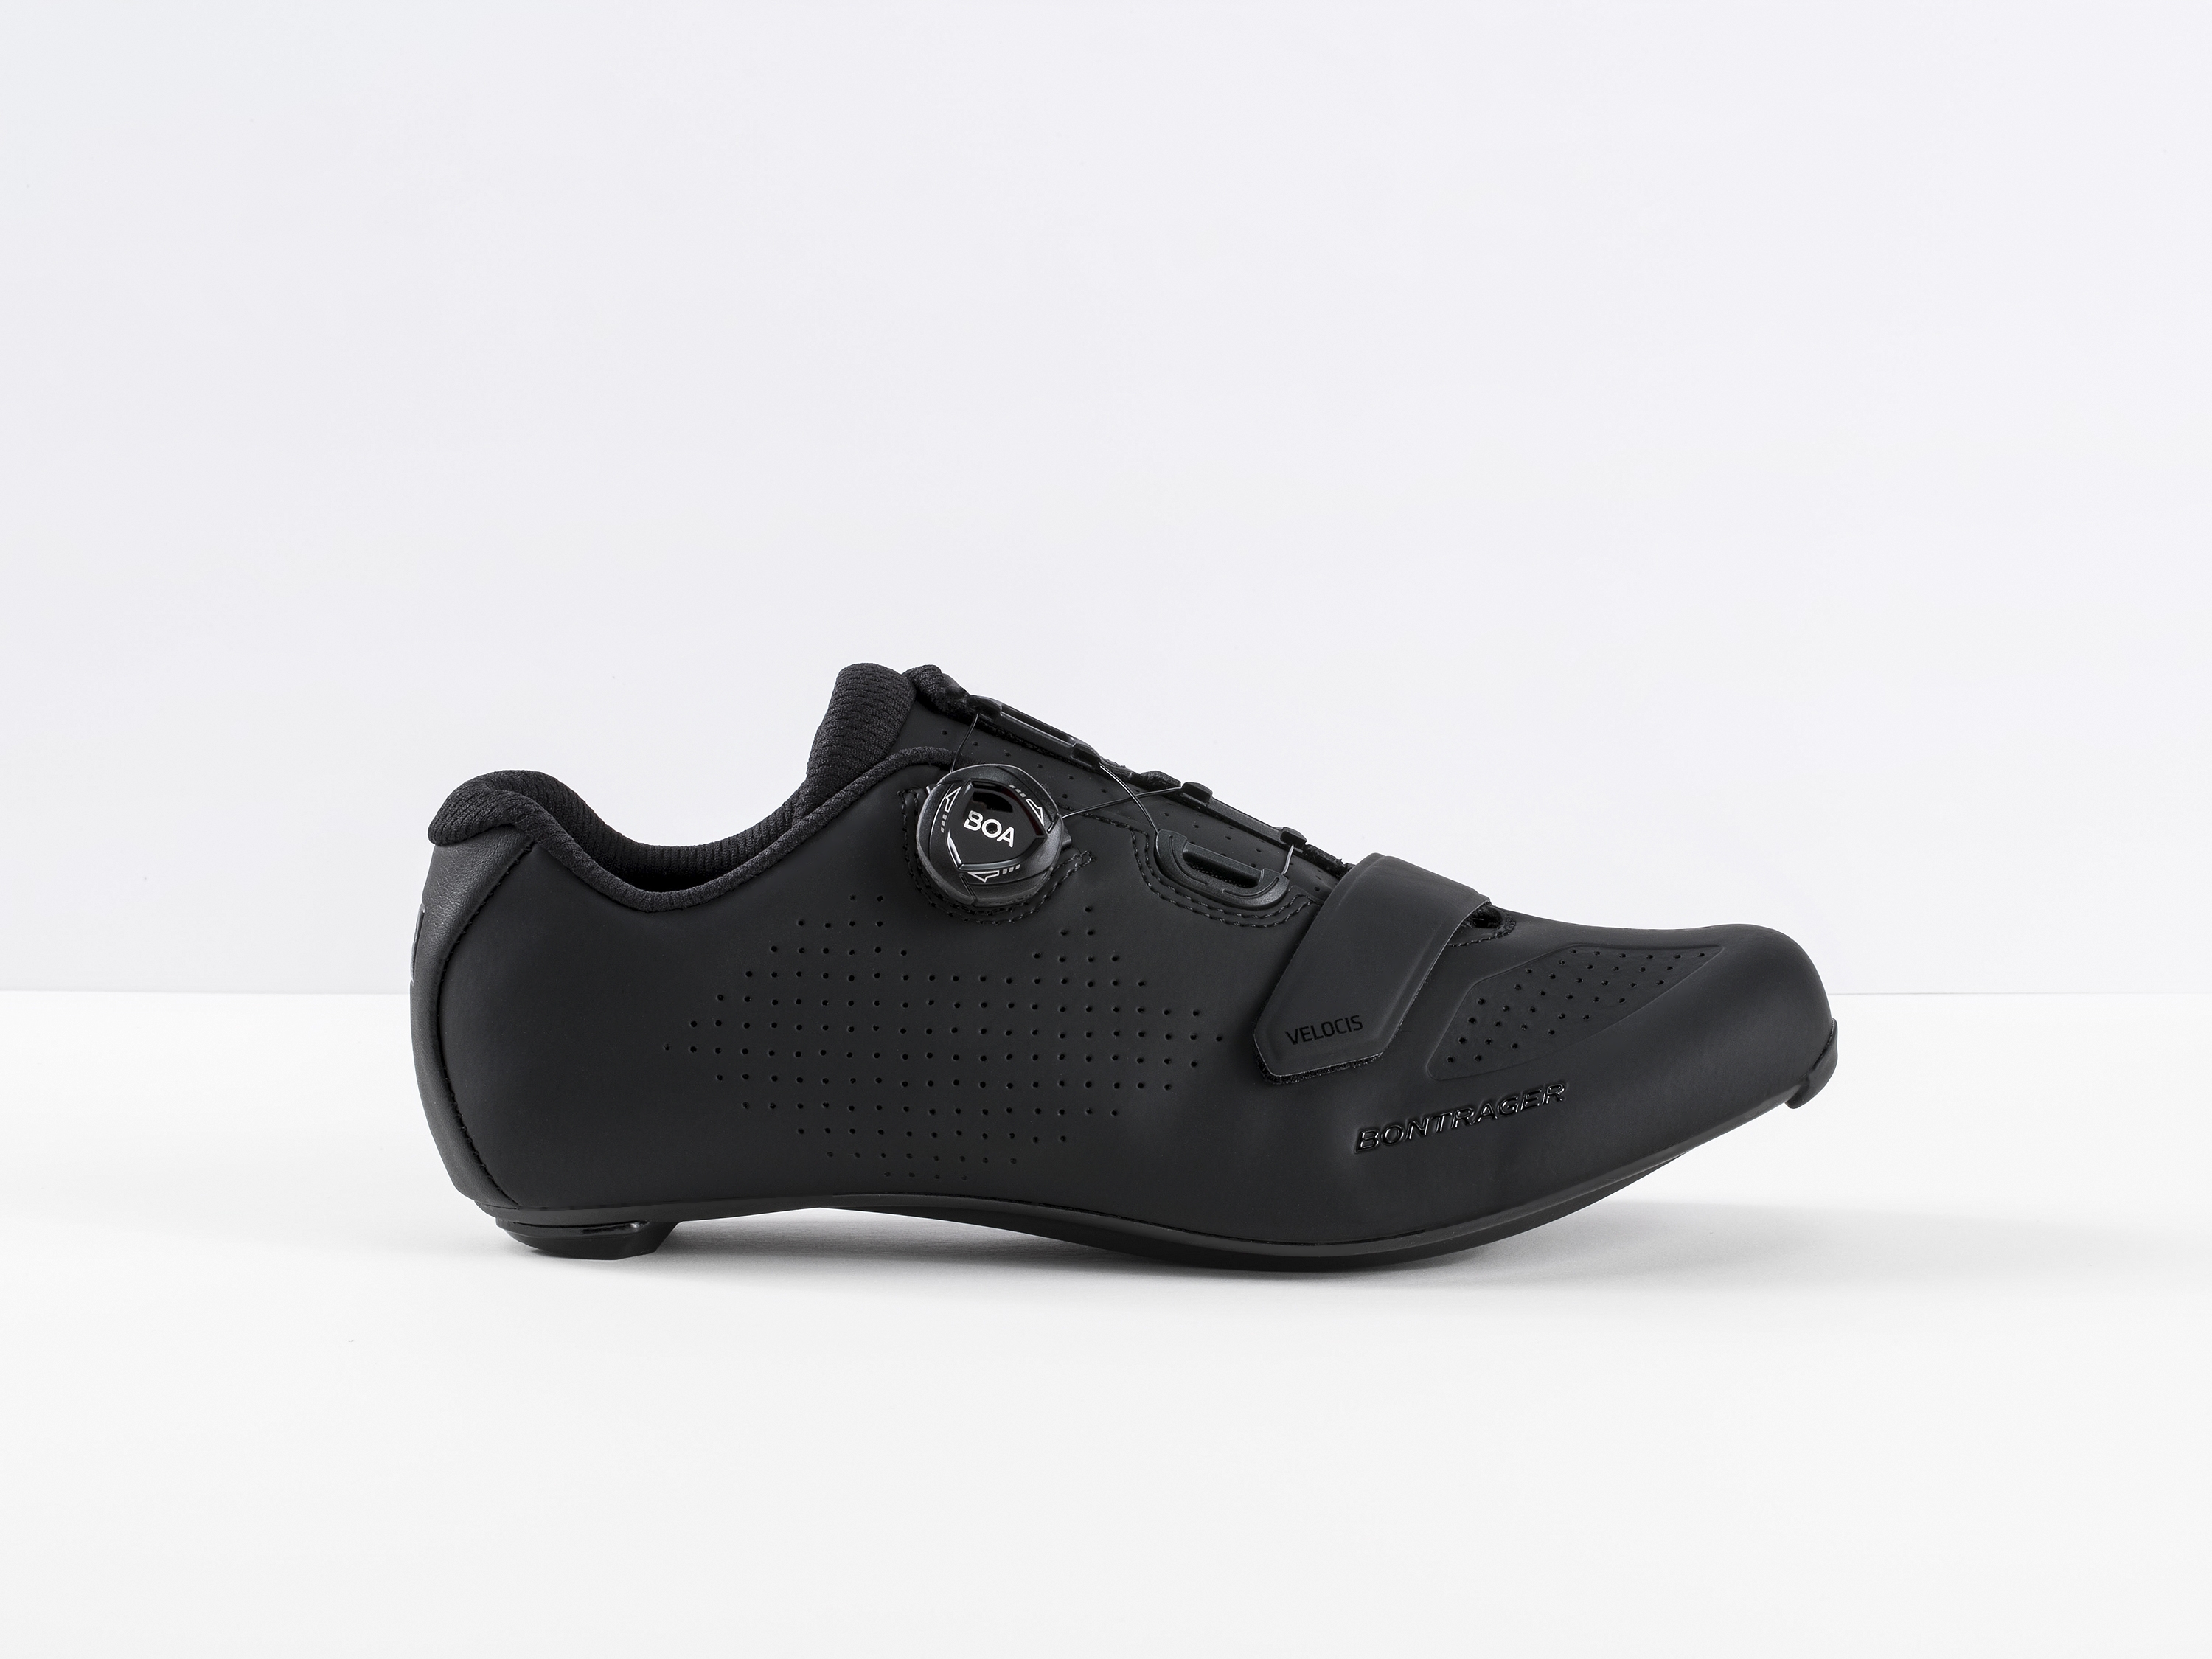 <a href="https://cycles-clement.be/product/bont-chaussures-velocis-41-black/">BONT CHAUSSURES VELOCIS  41 BLACK</a>